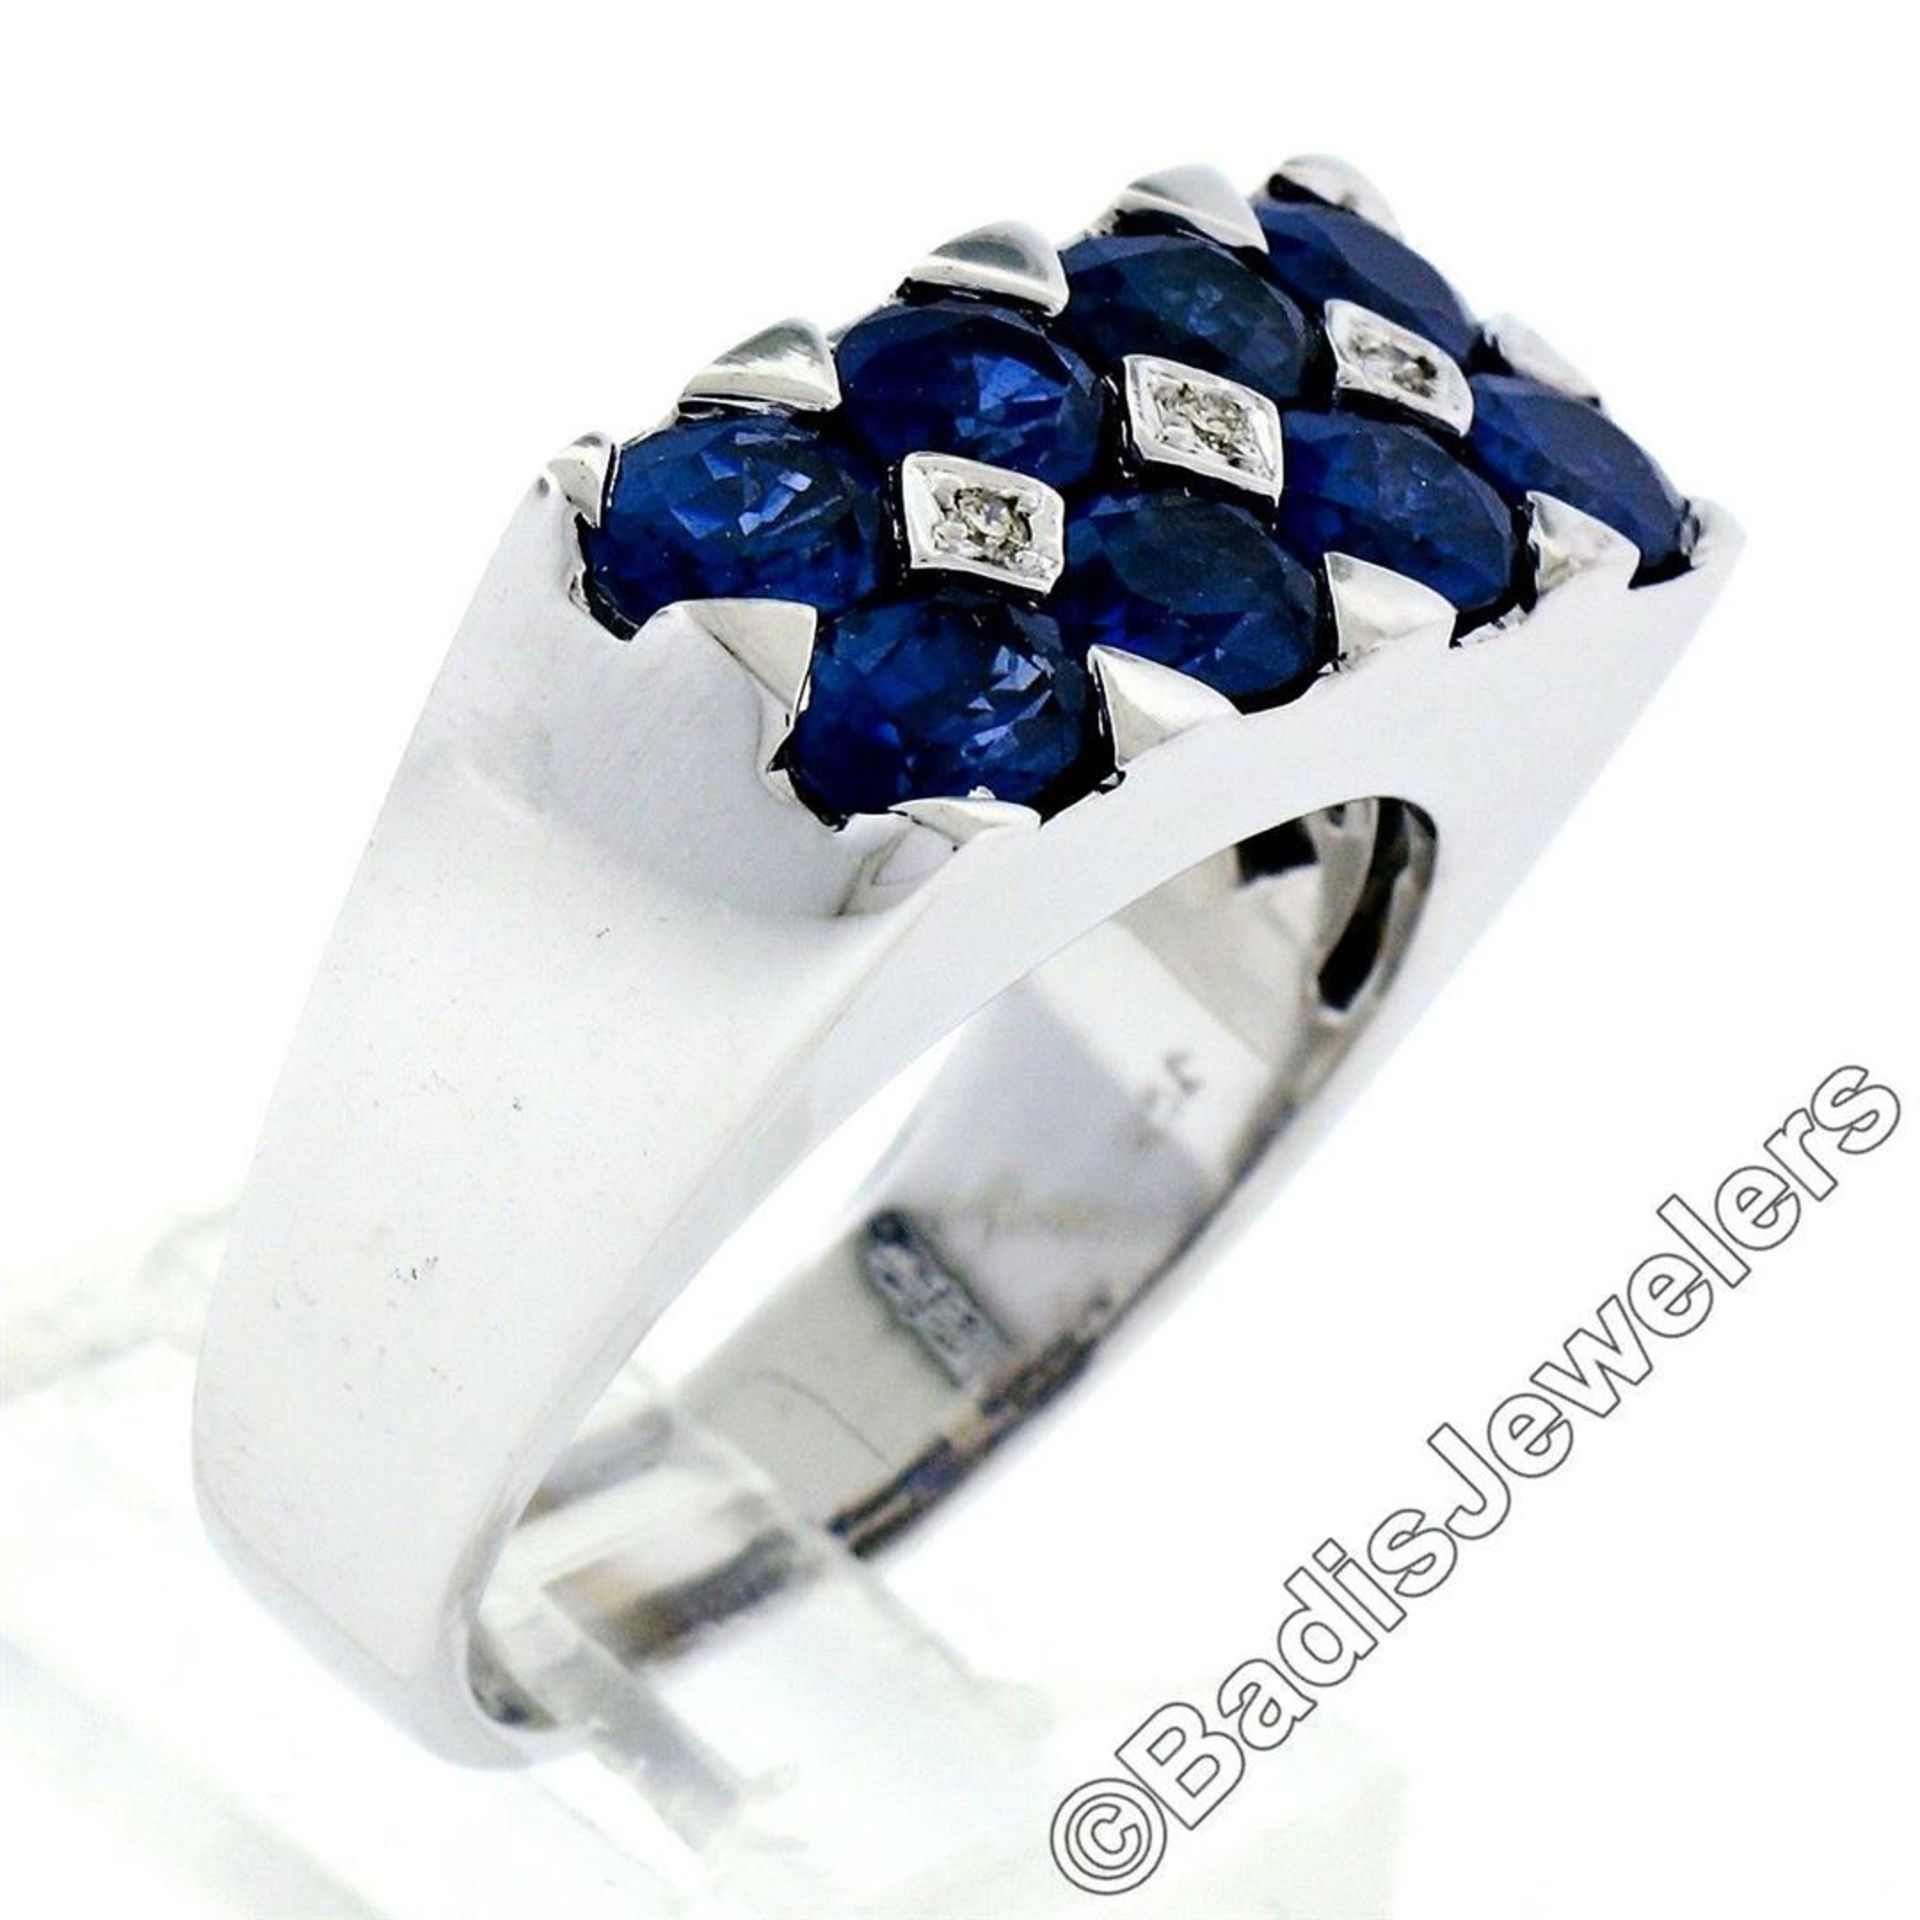 18kt White Gold 4.03 ctw Dual Row Oval Cut Sapphire & Diamond Band Ring - Image 5 of 9